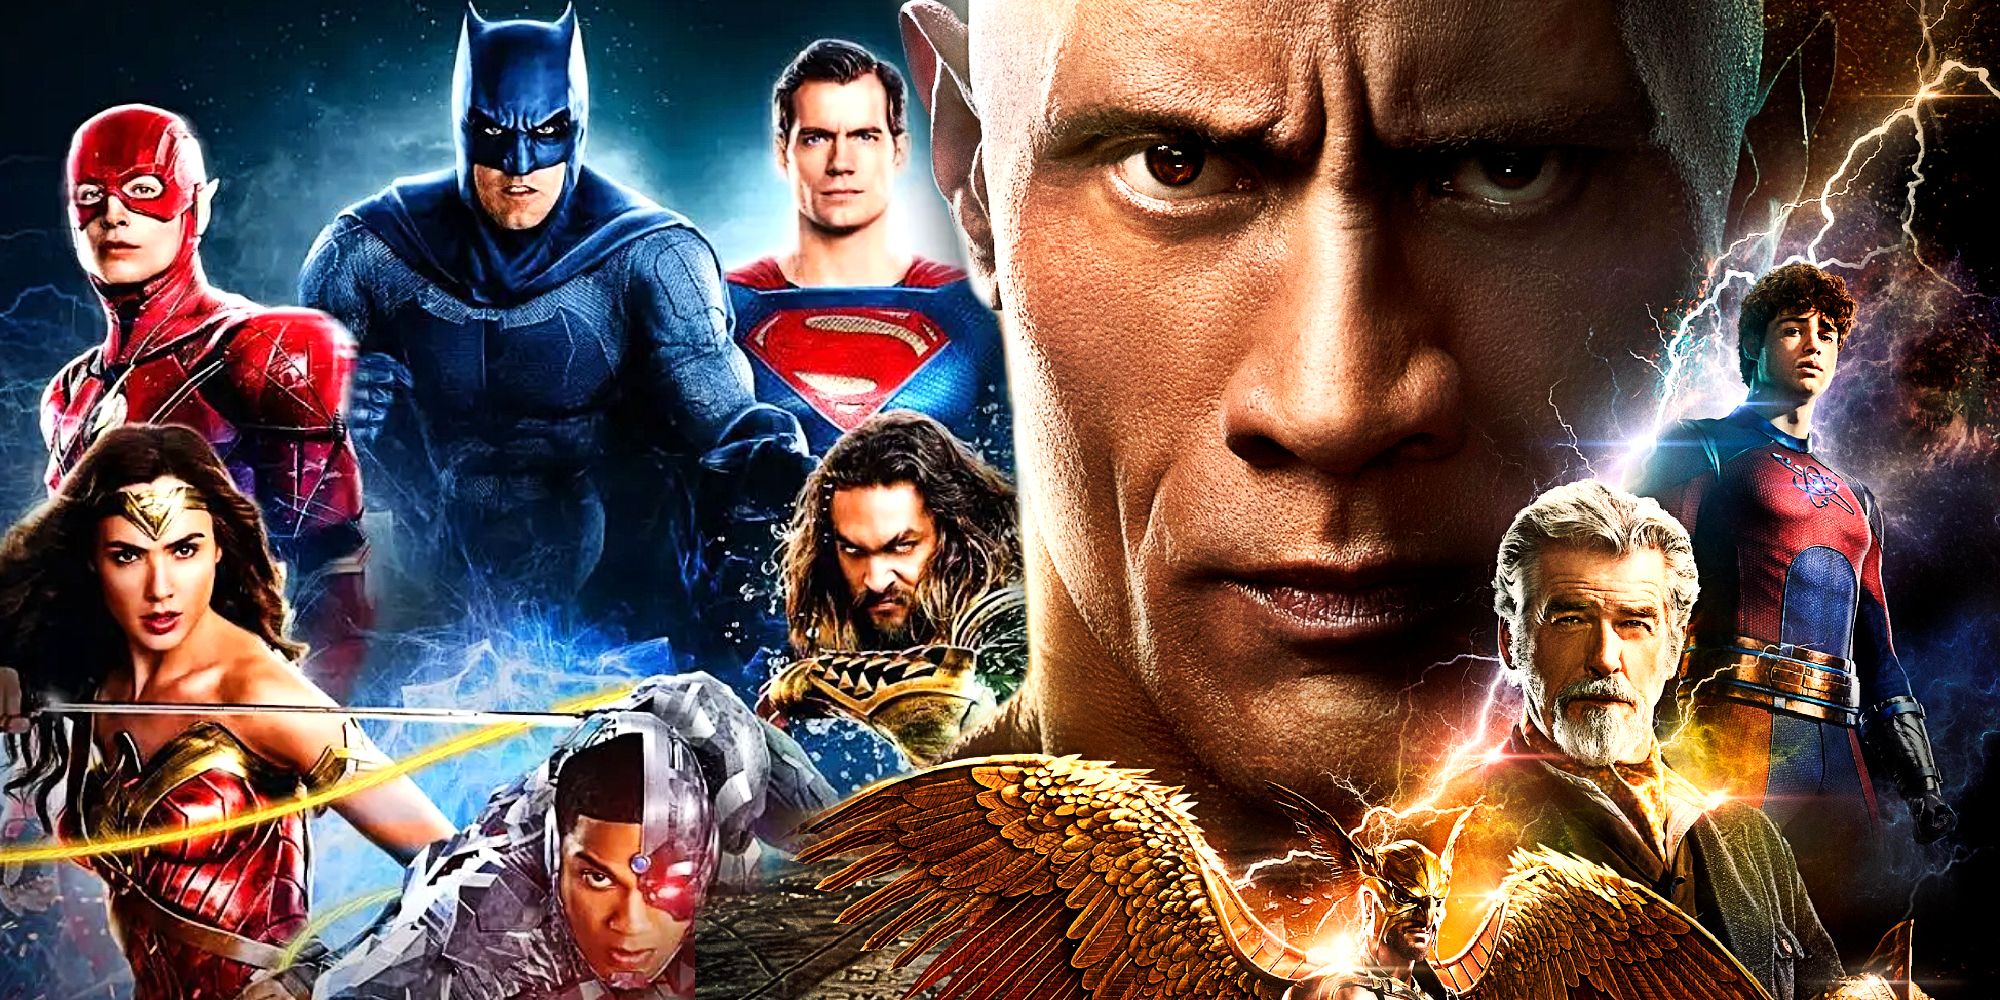 Dwayne Johnson's Black Adam with the JSA and the Justice League in the DCEU